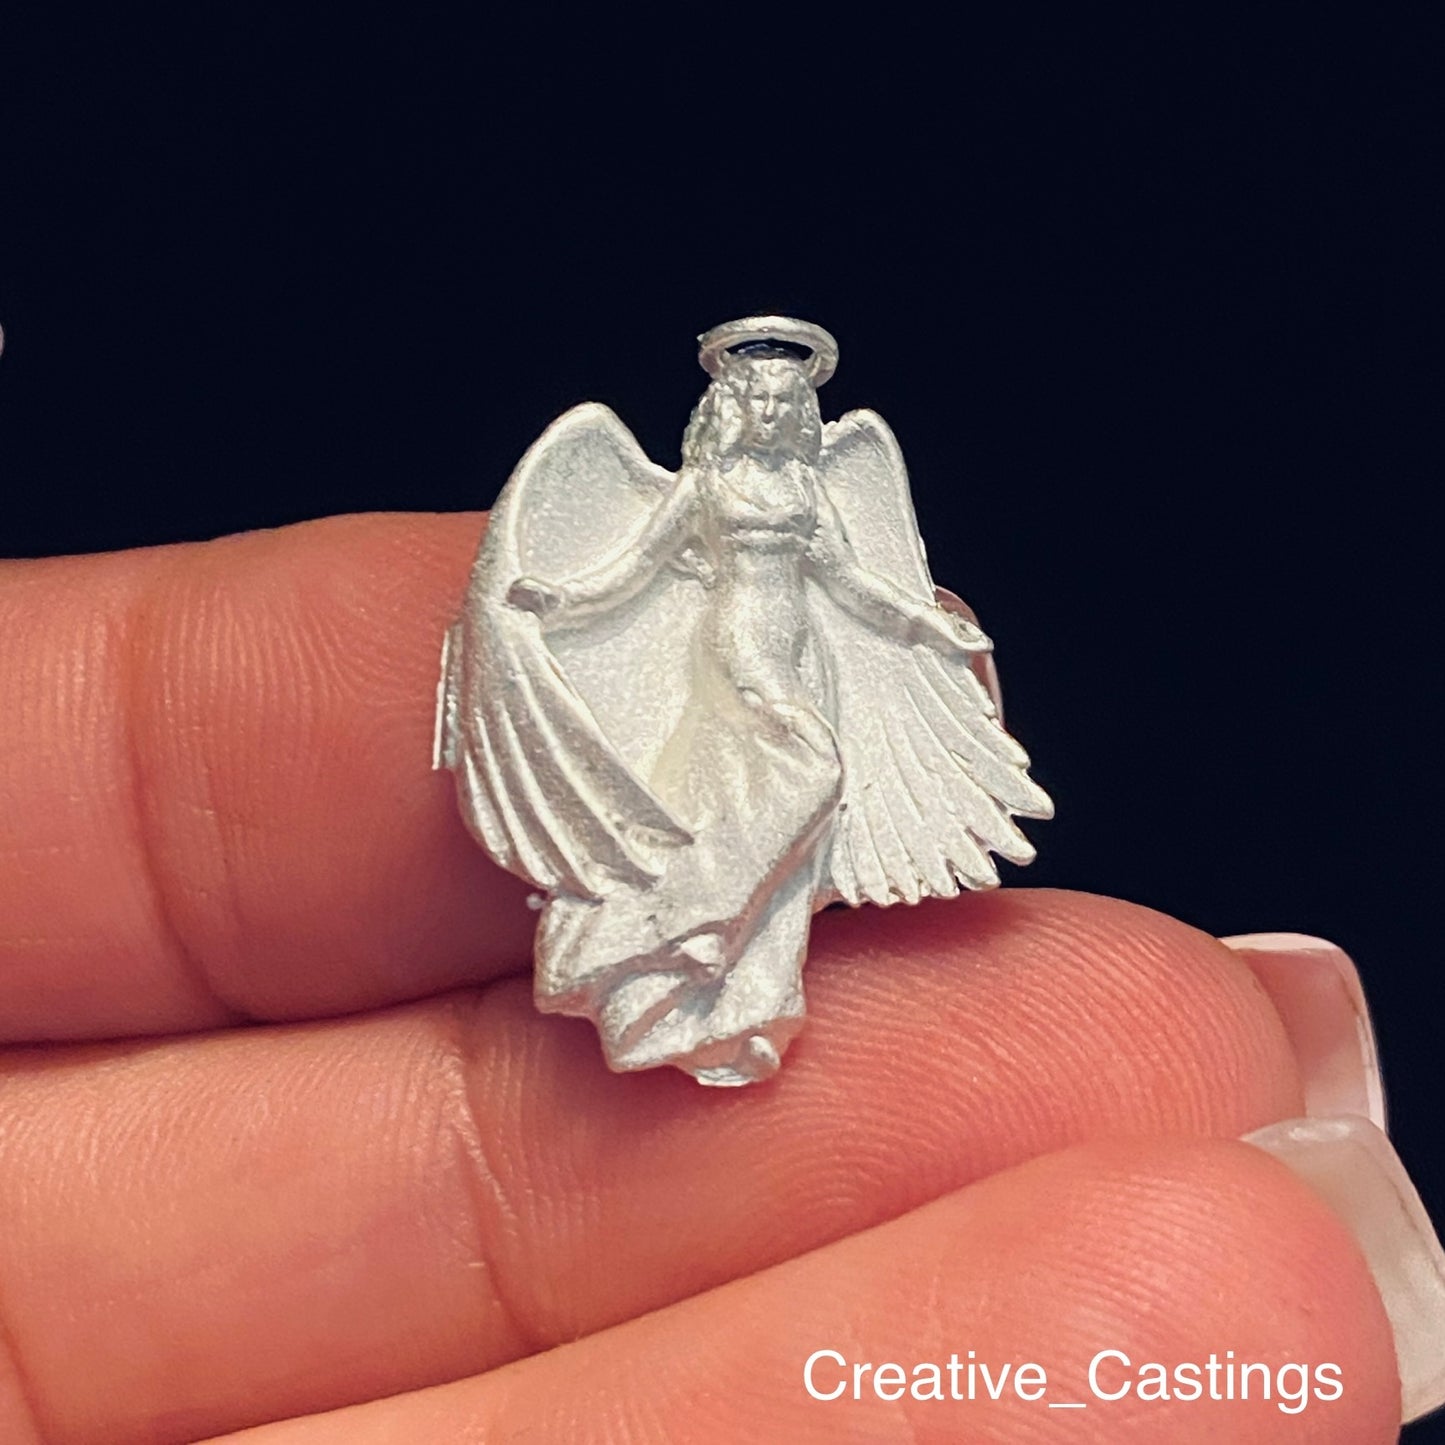 Angel Casting for Jewelry Design